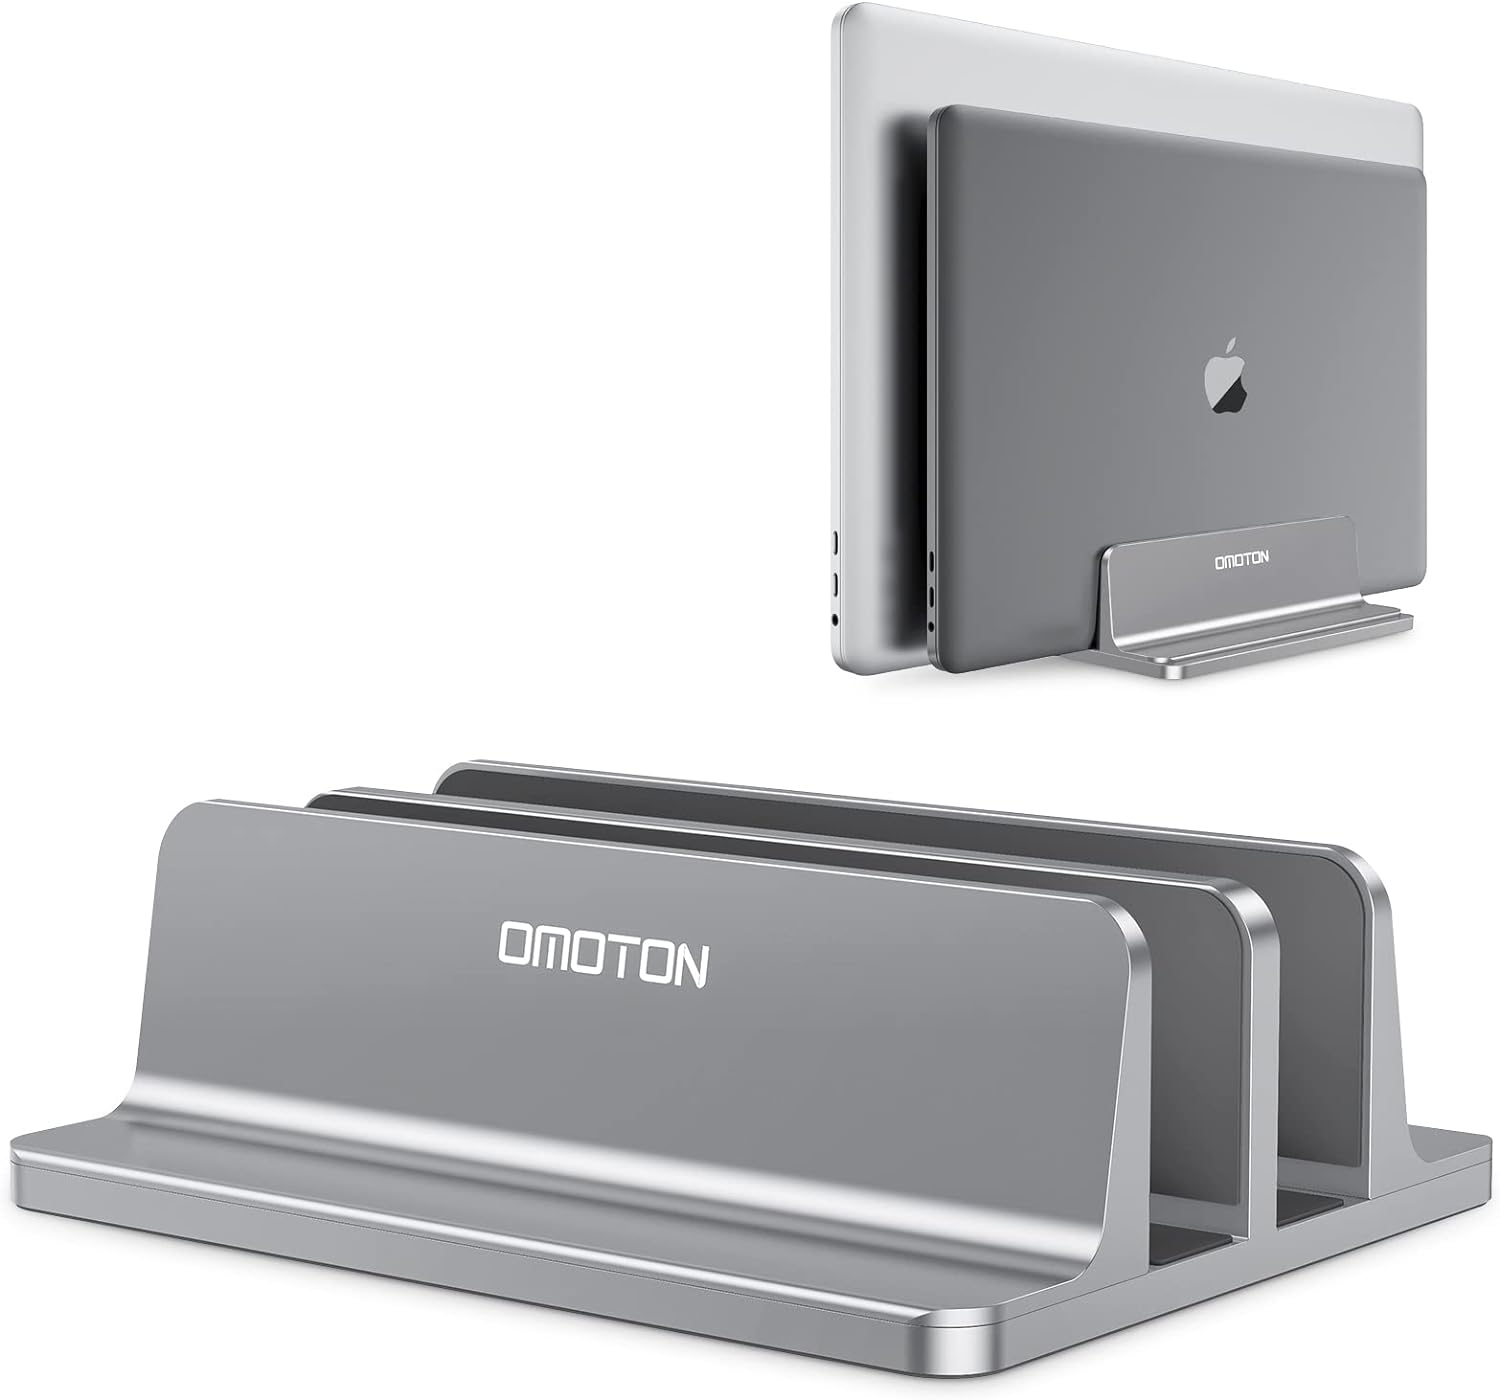 OMOTON [Updated Dock Version Vertical Laptop Stand, Double Desktop Stand Holder with Adjustable Dock (Up to 17.3 inch), Fits All MacBook/Surface/Samsung/HP/Dell/Chrome Book (Grey)